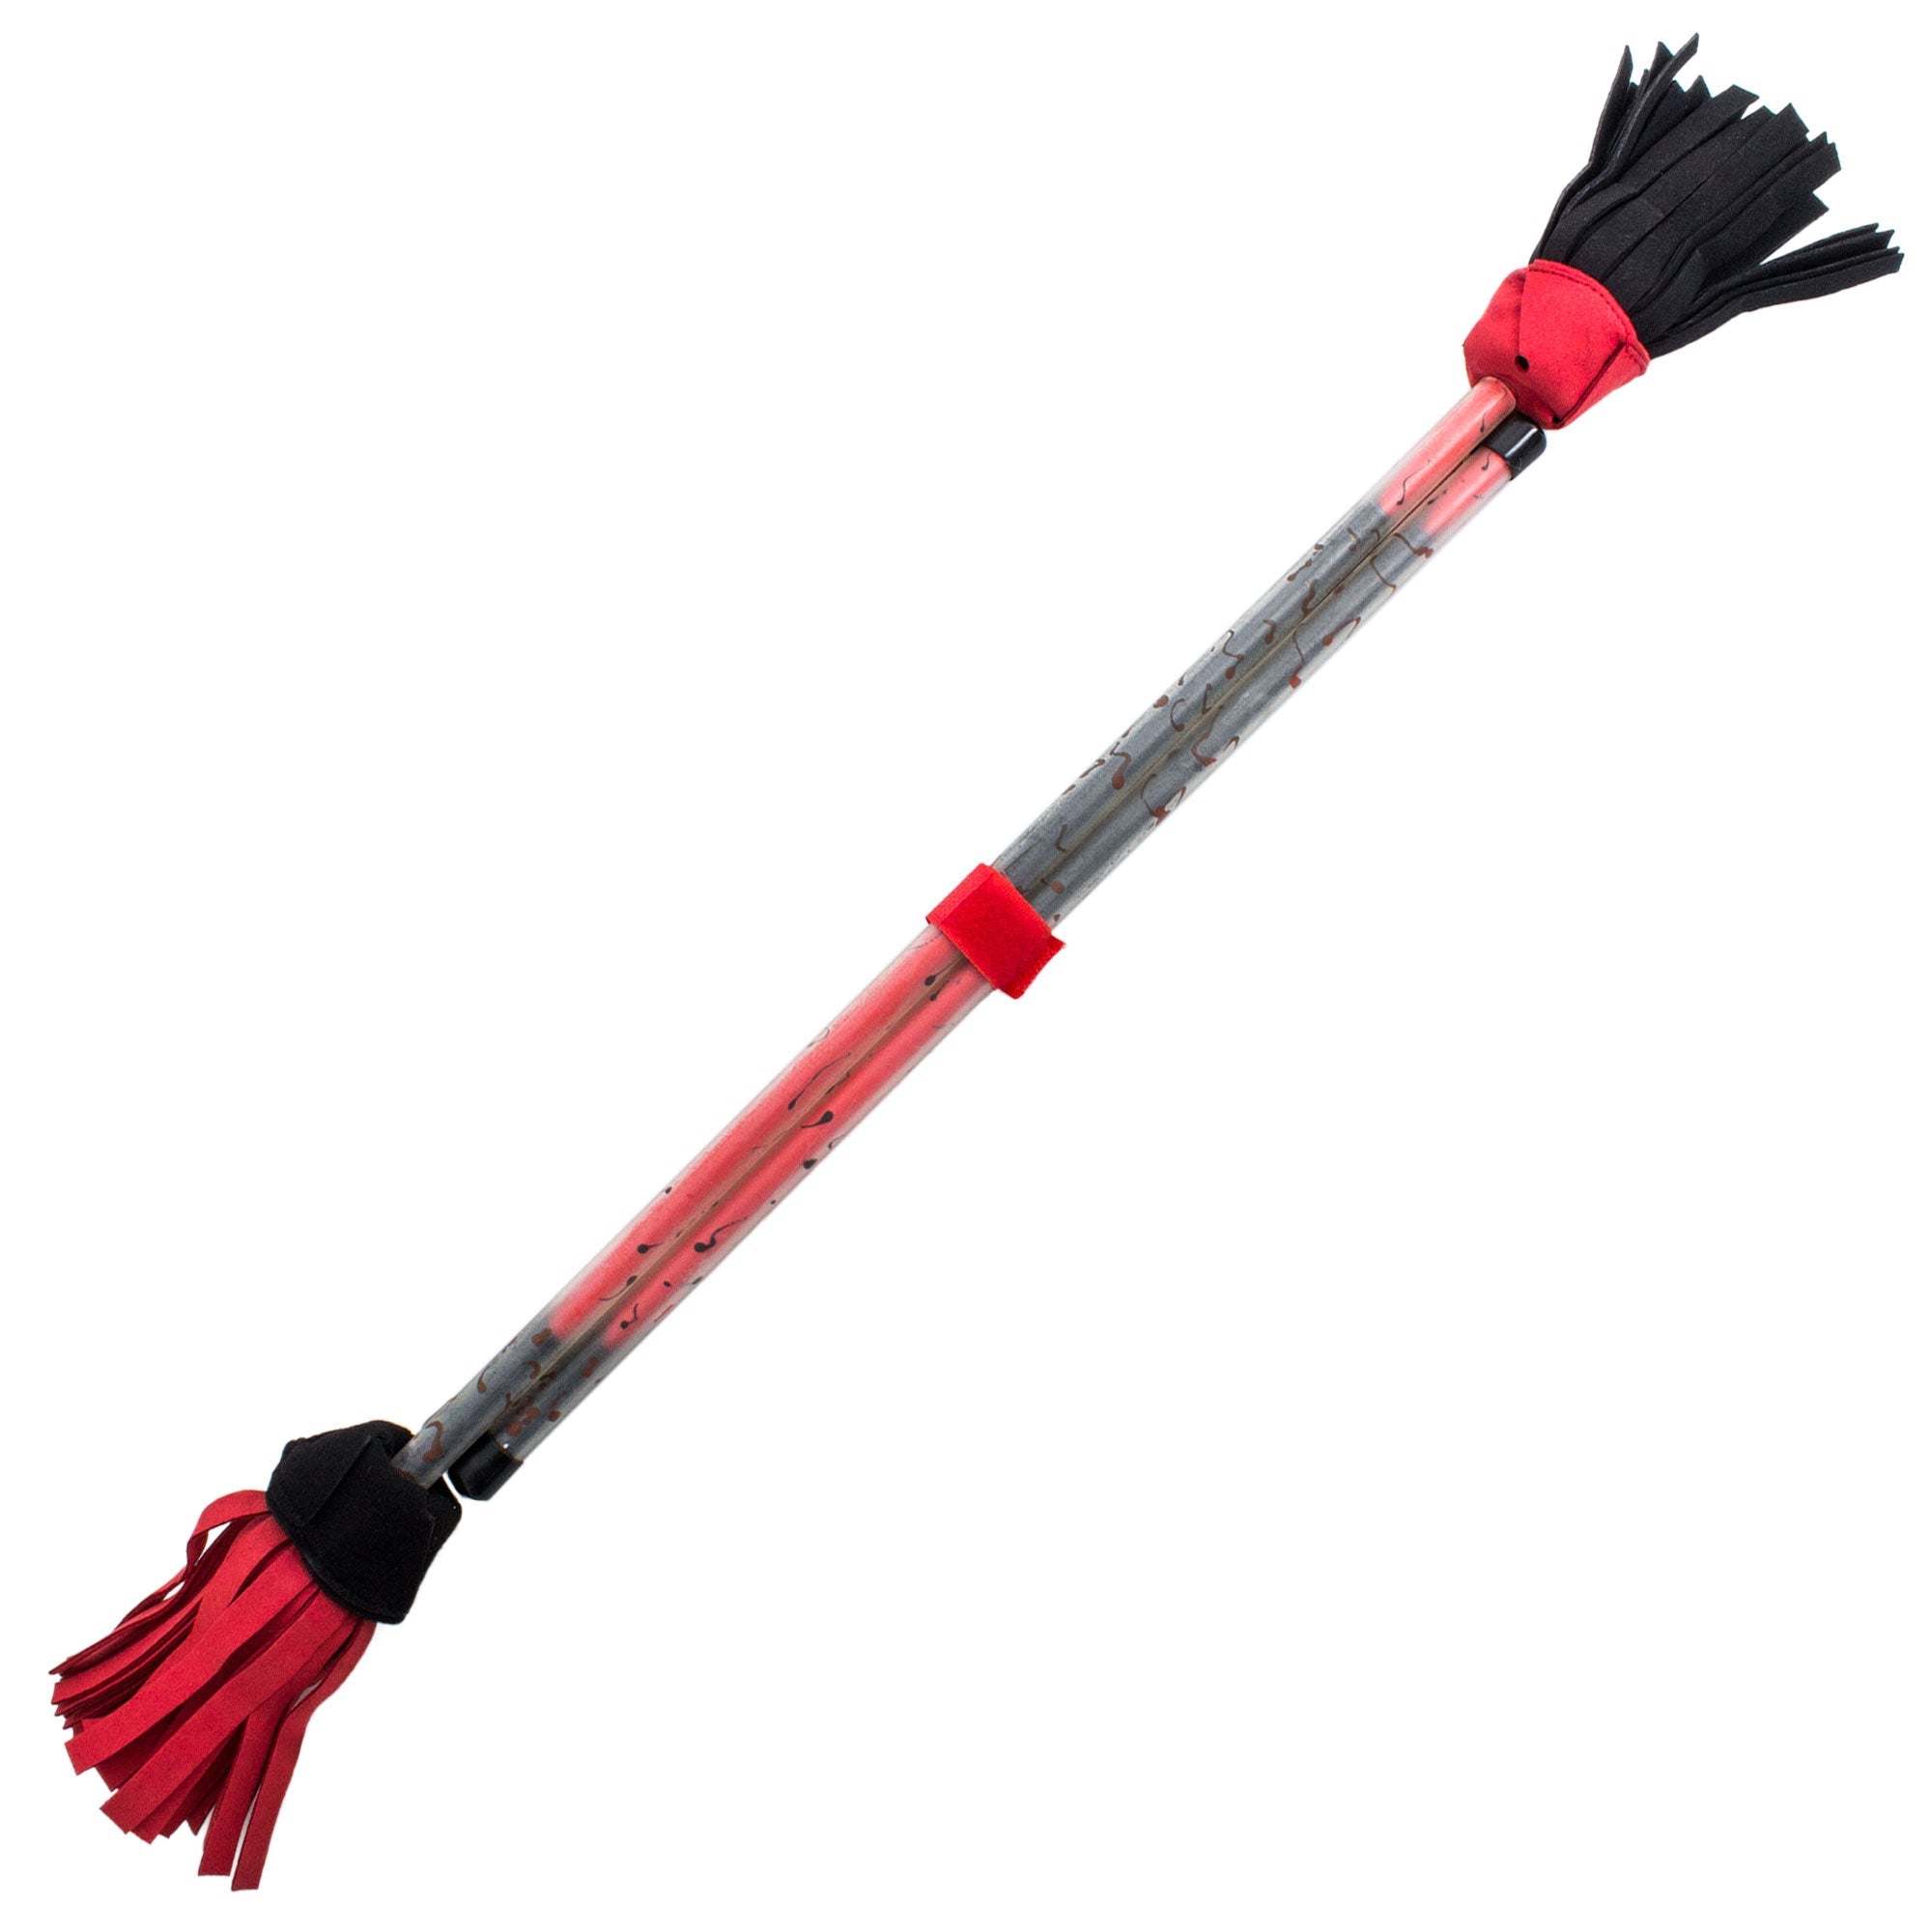 black and red picasso flower stick and hand sticks strapped together